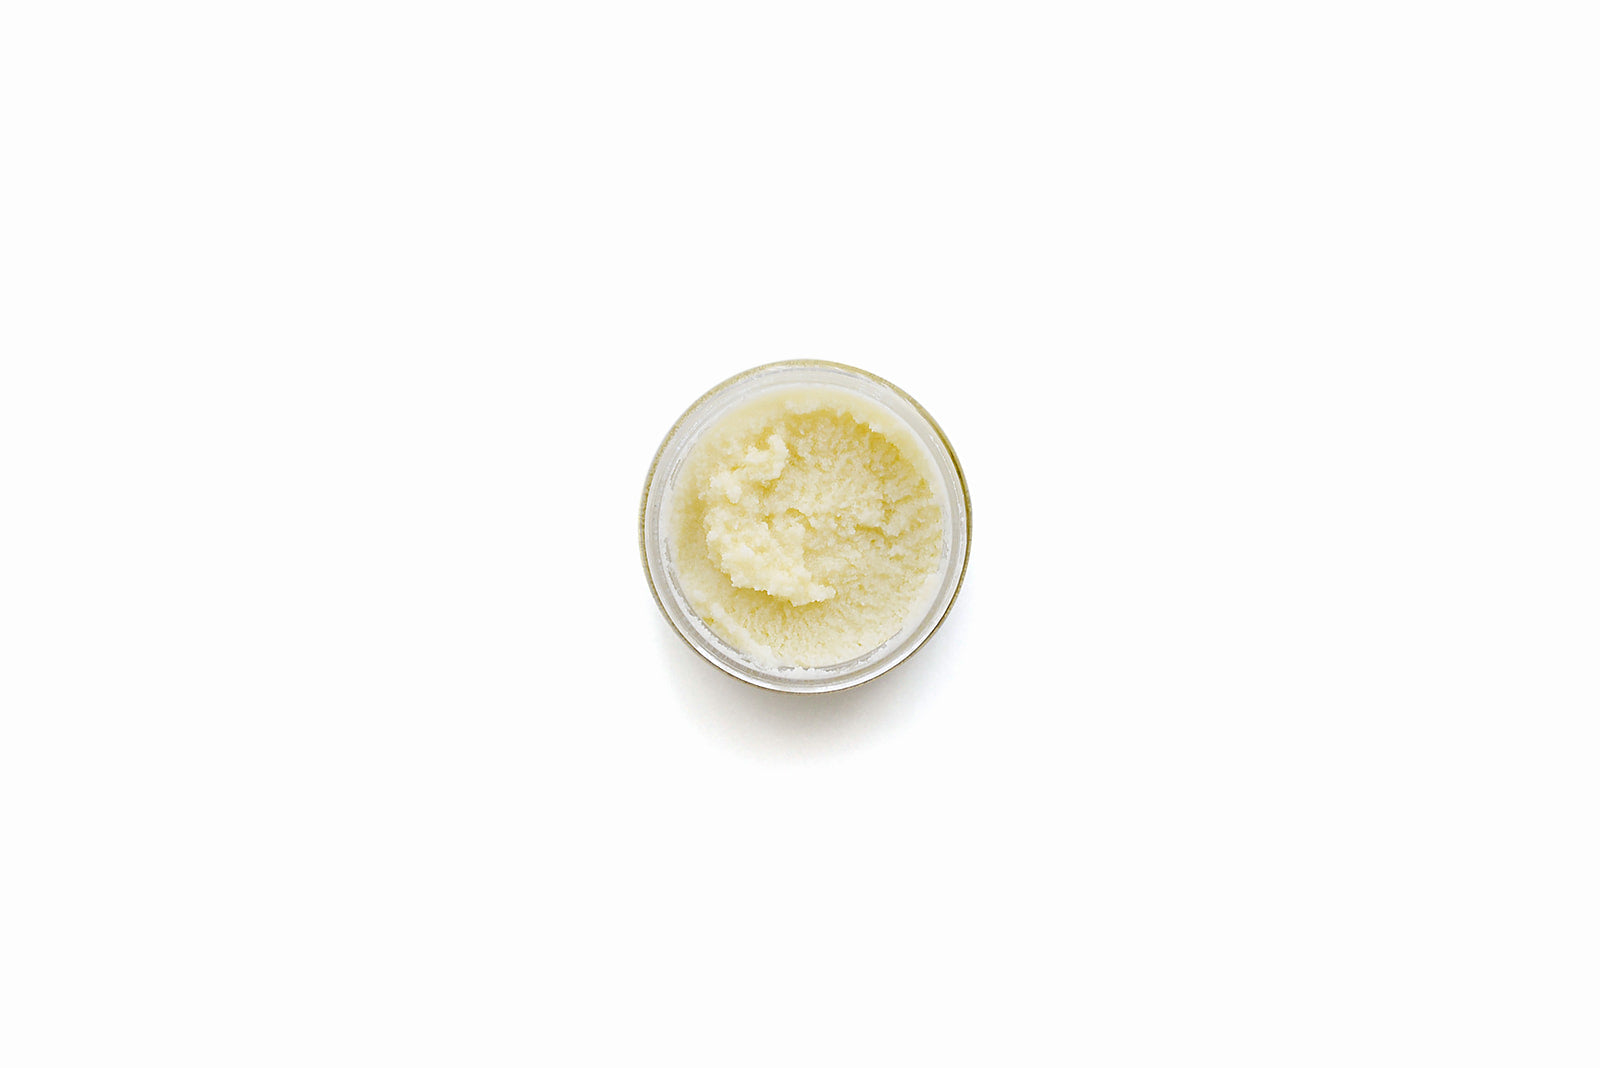 Distinction Whipped Body Butter